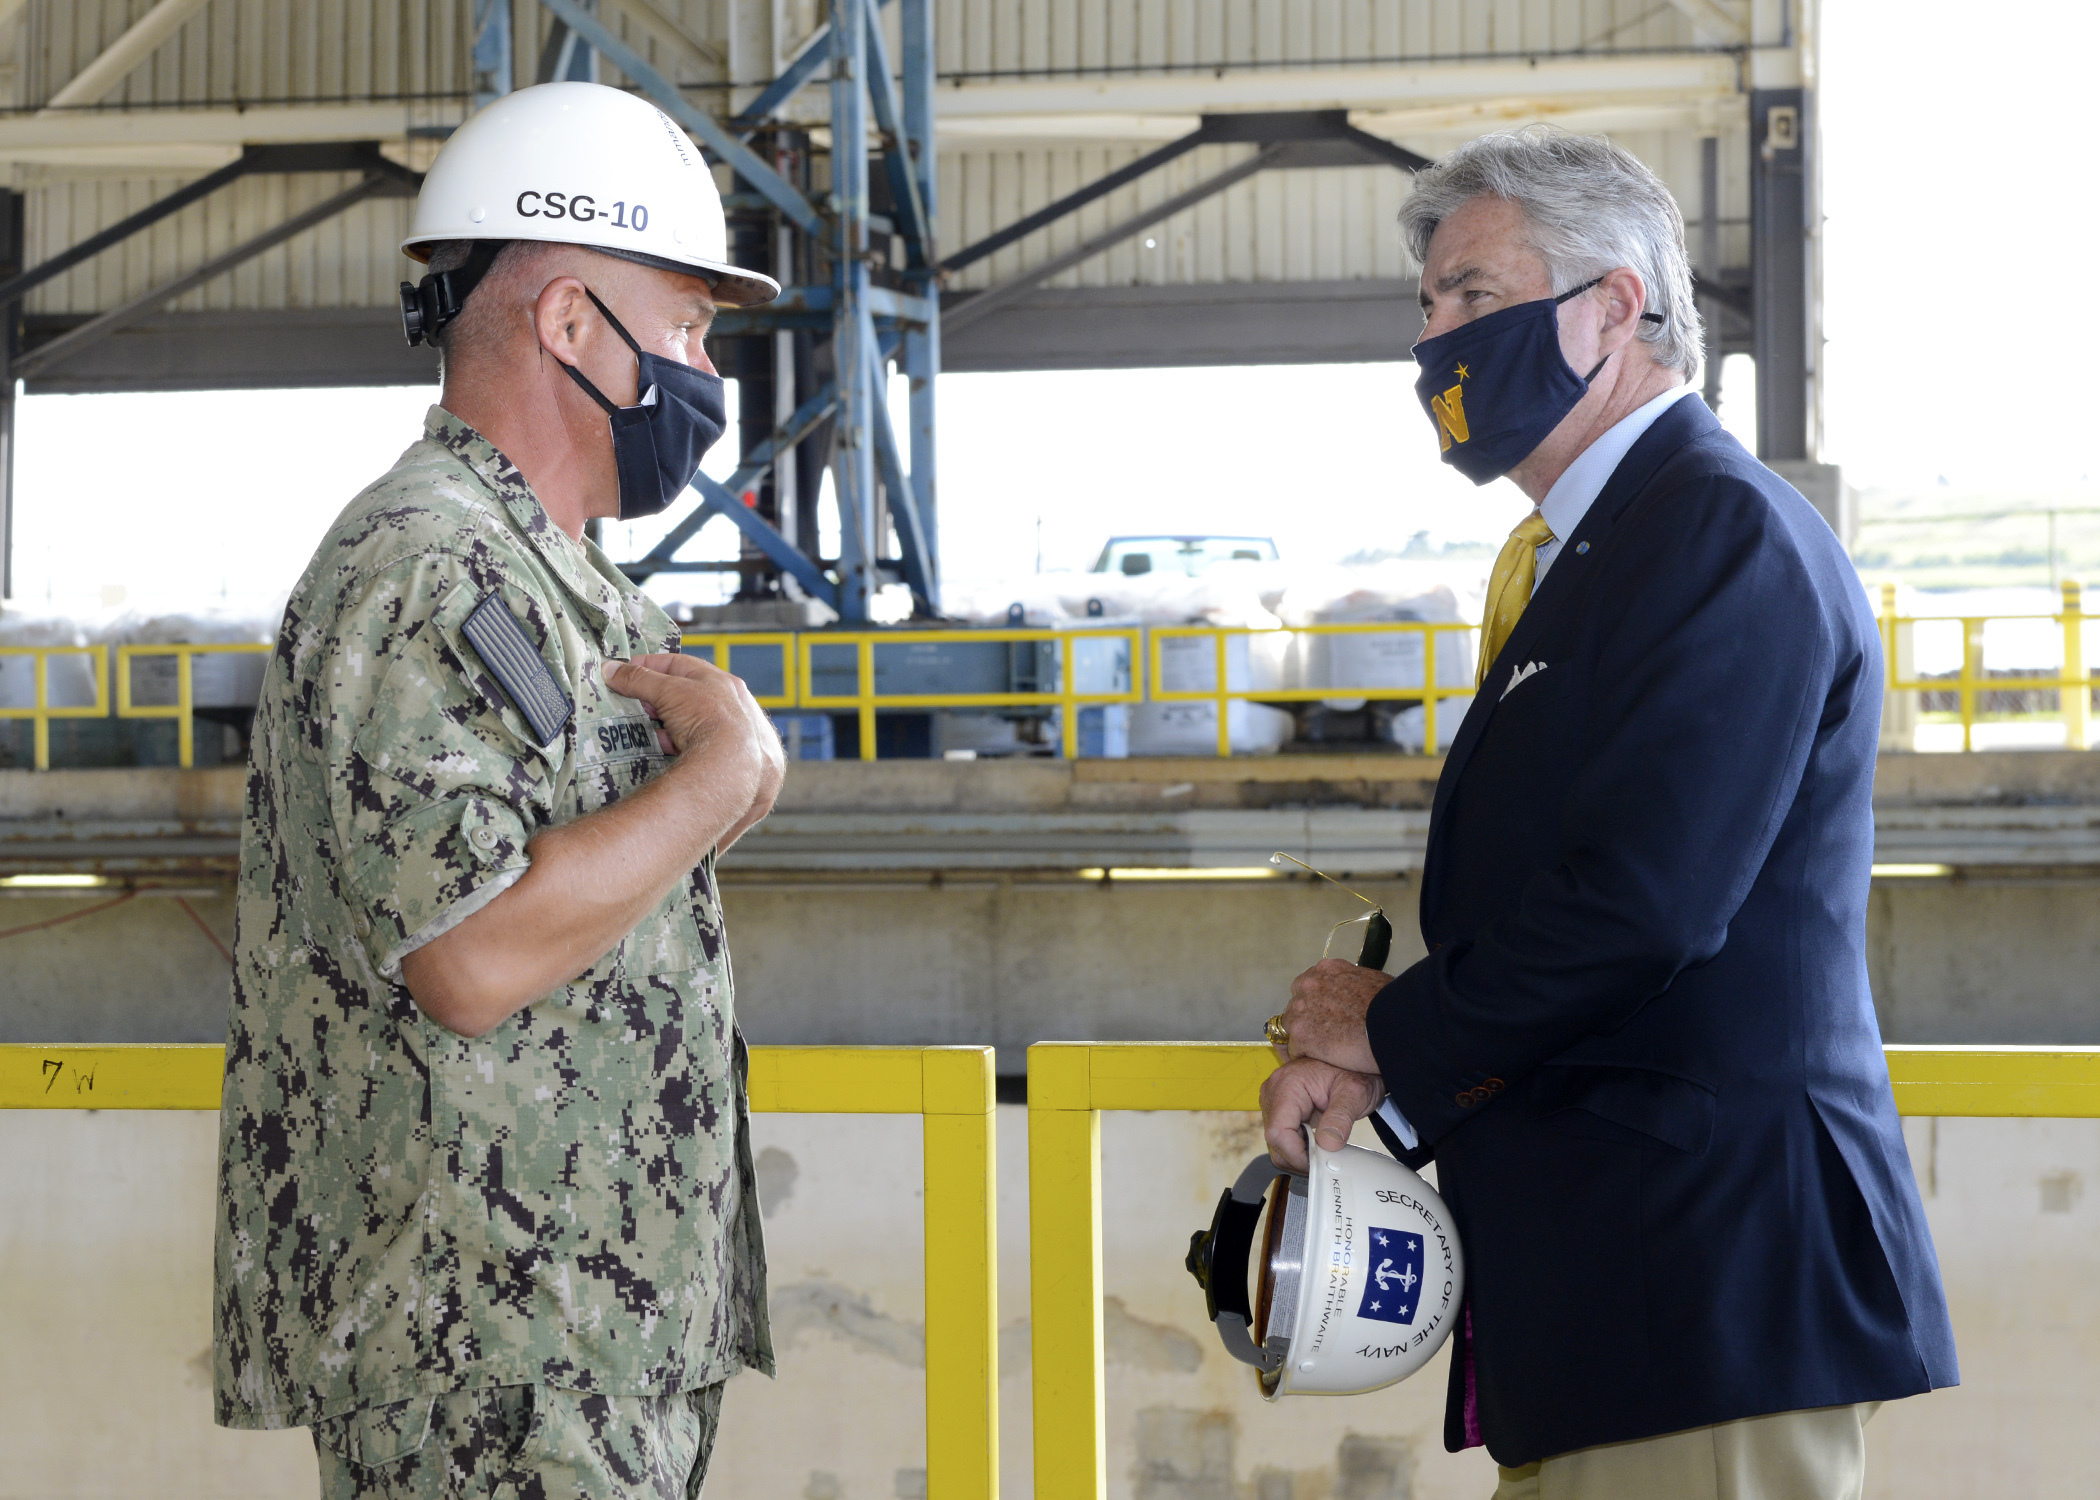 Secretary of the Navy Kenneth J. Braithwaite tours the largest covered dry dock in the U.S. with Rear Adm. John Spencer, commander of Submarine Group Ten, during his visit to Naval Submarine Base Kings Bay, Ga.